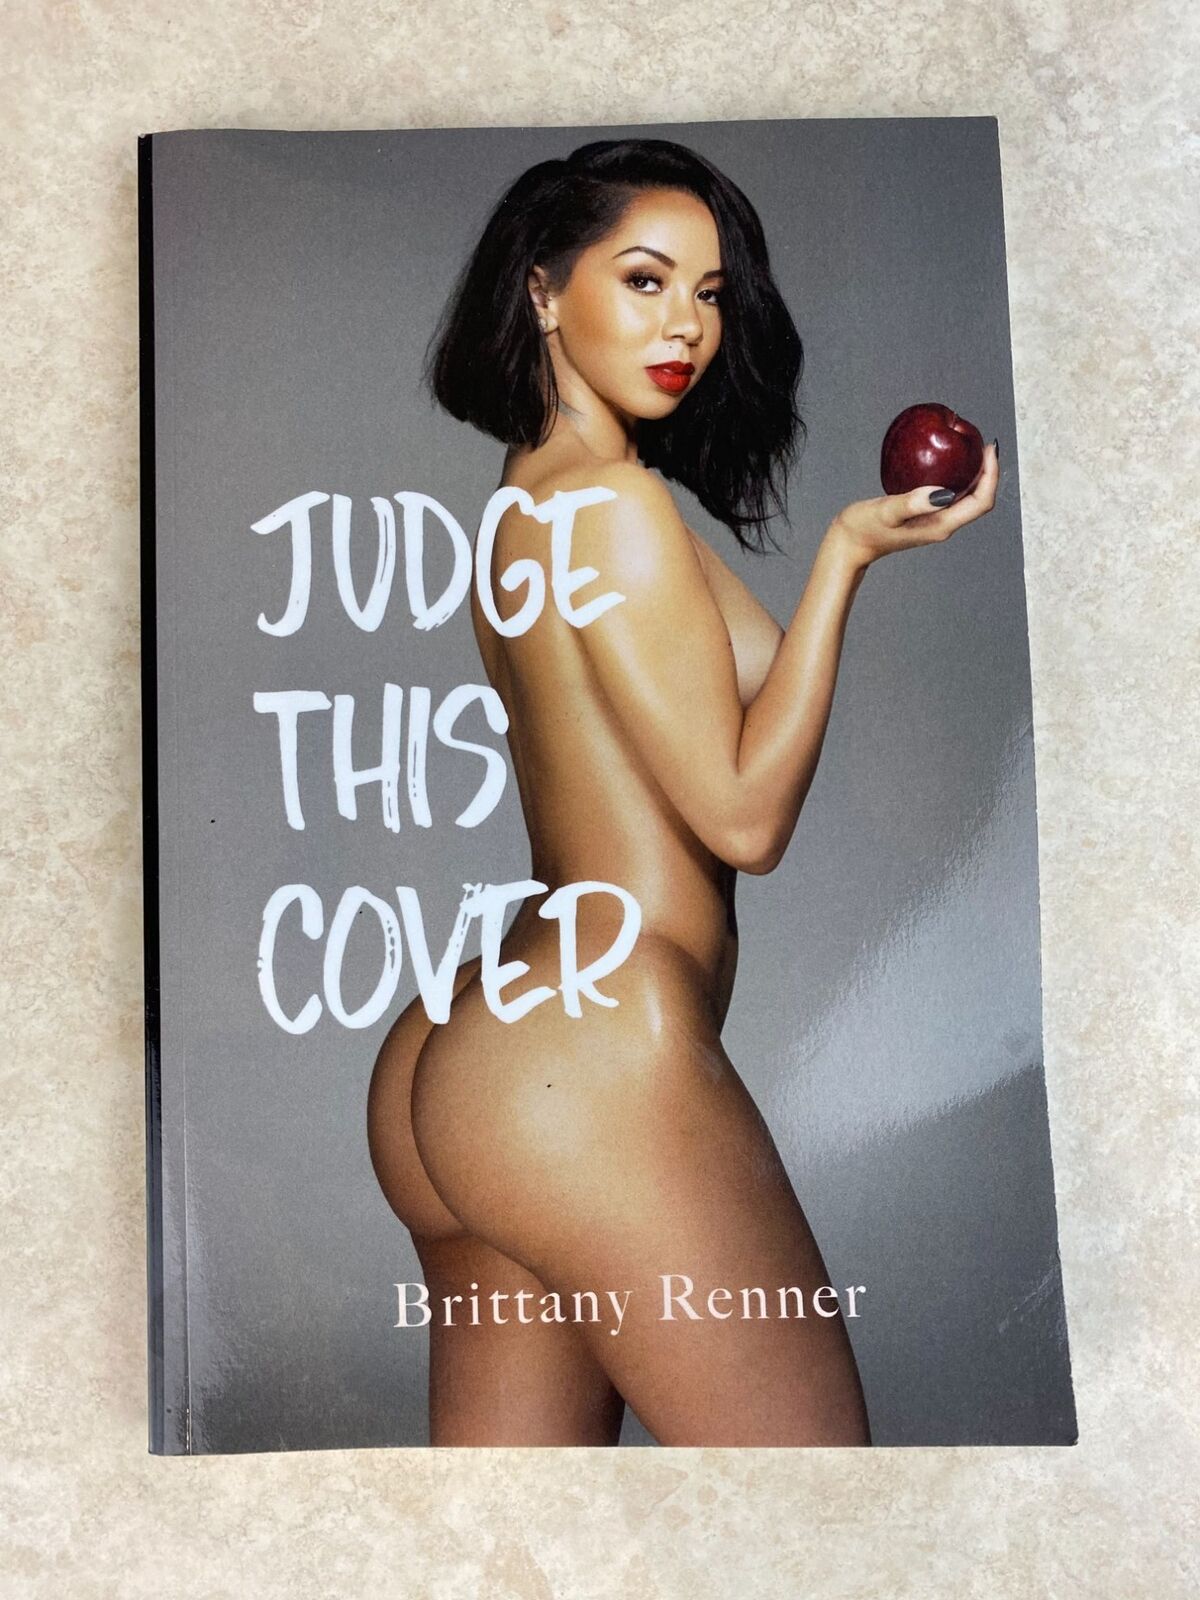 amy crabbs recommends brittany renner naked pic